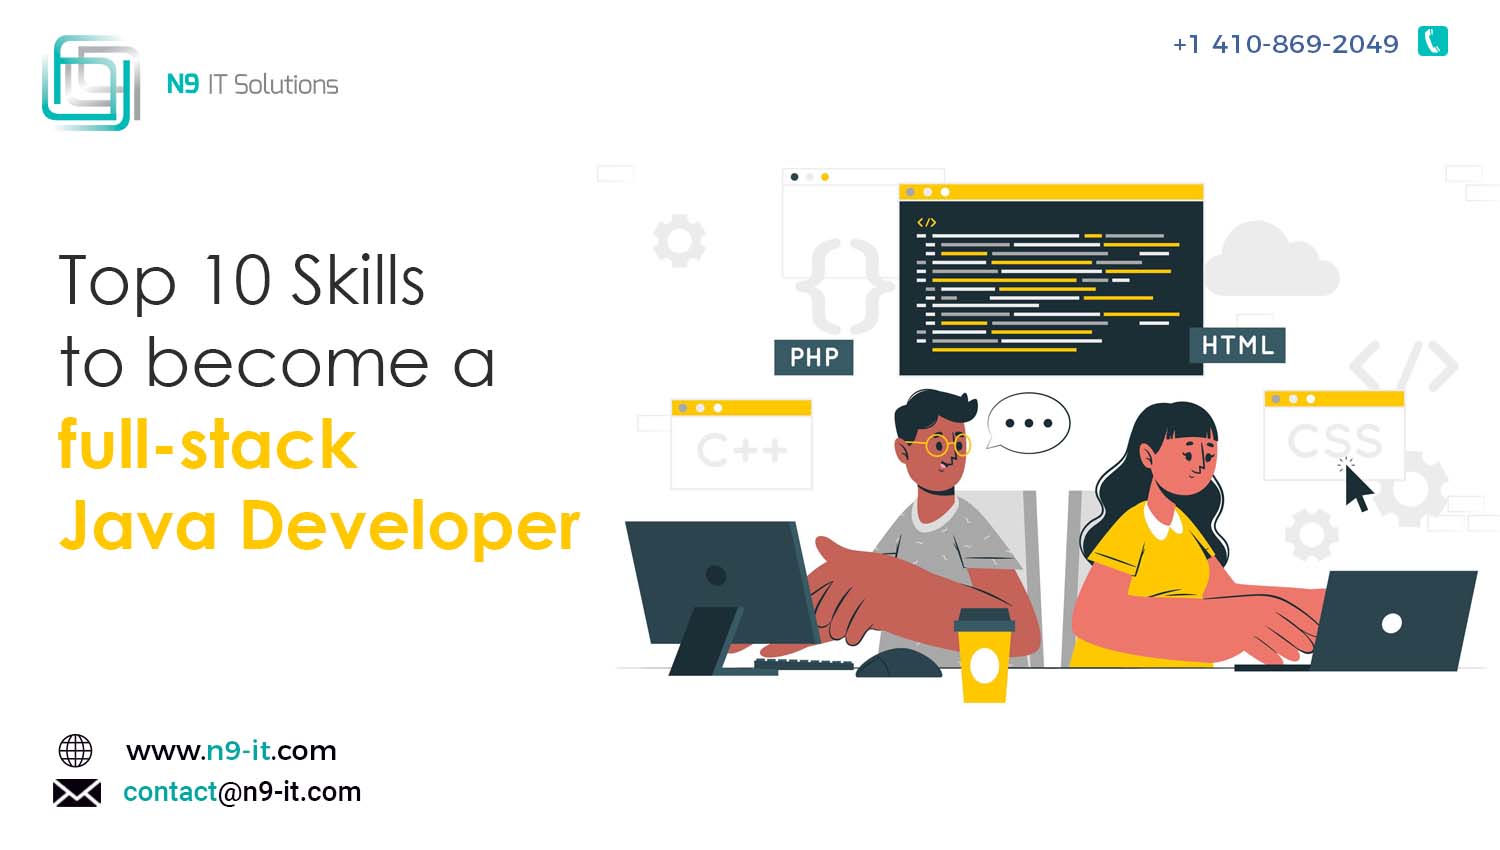 Top 10 Skills to become a full-stack Java Developer